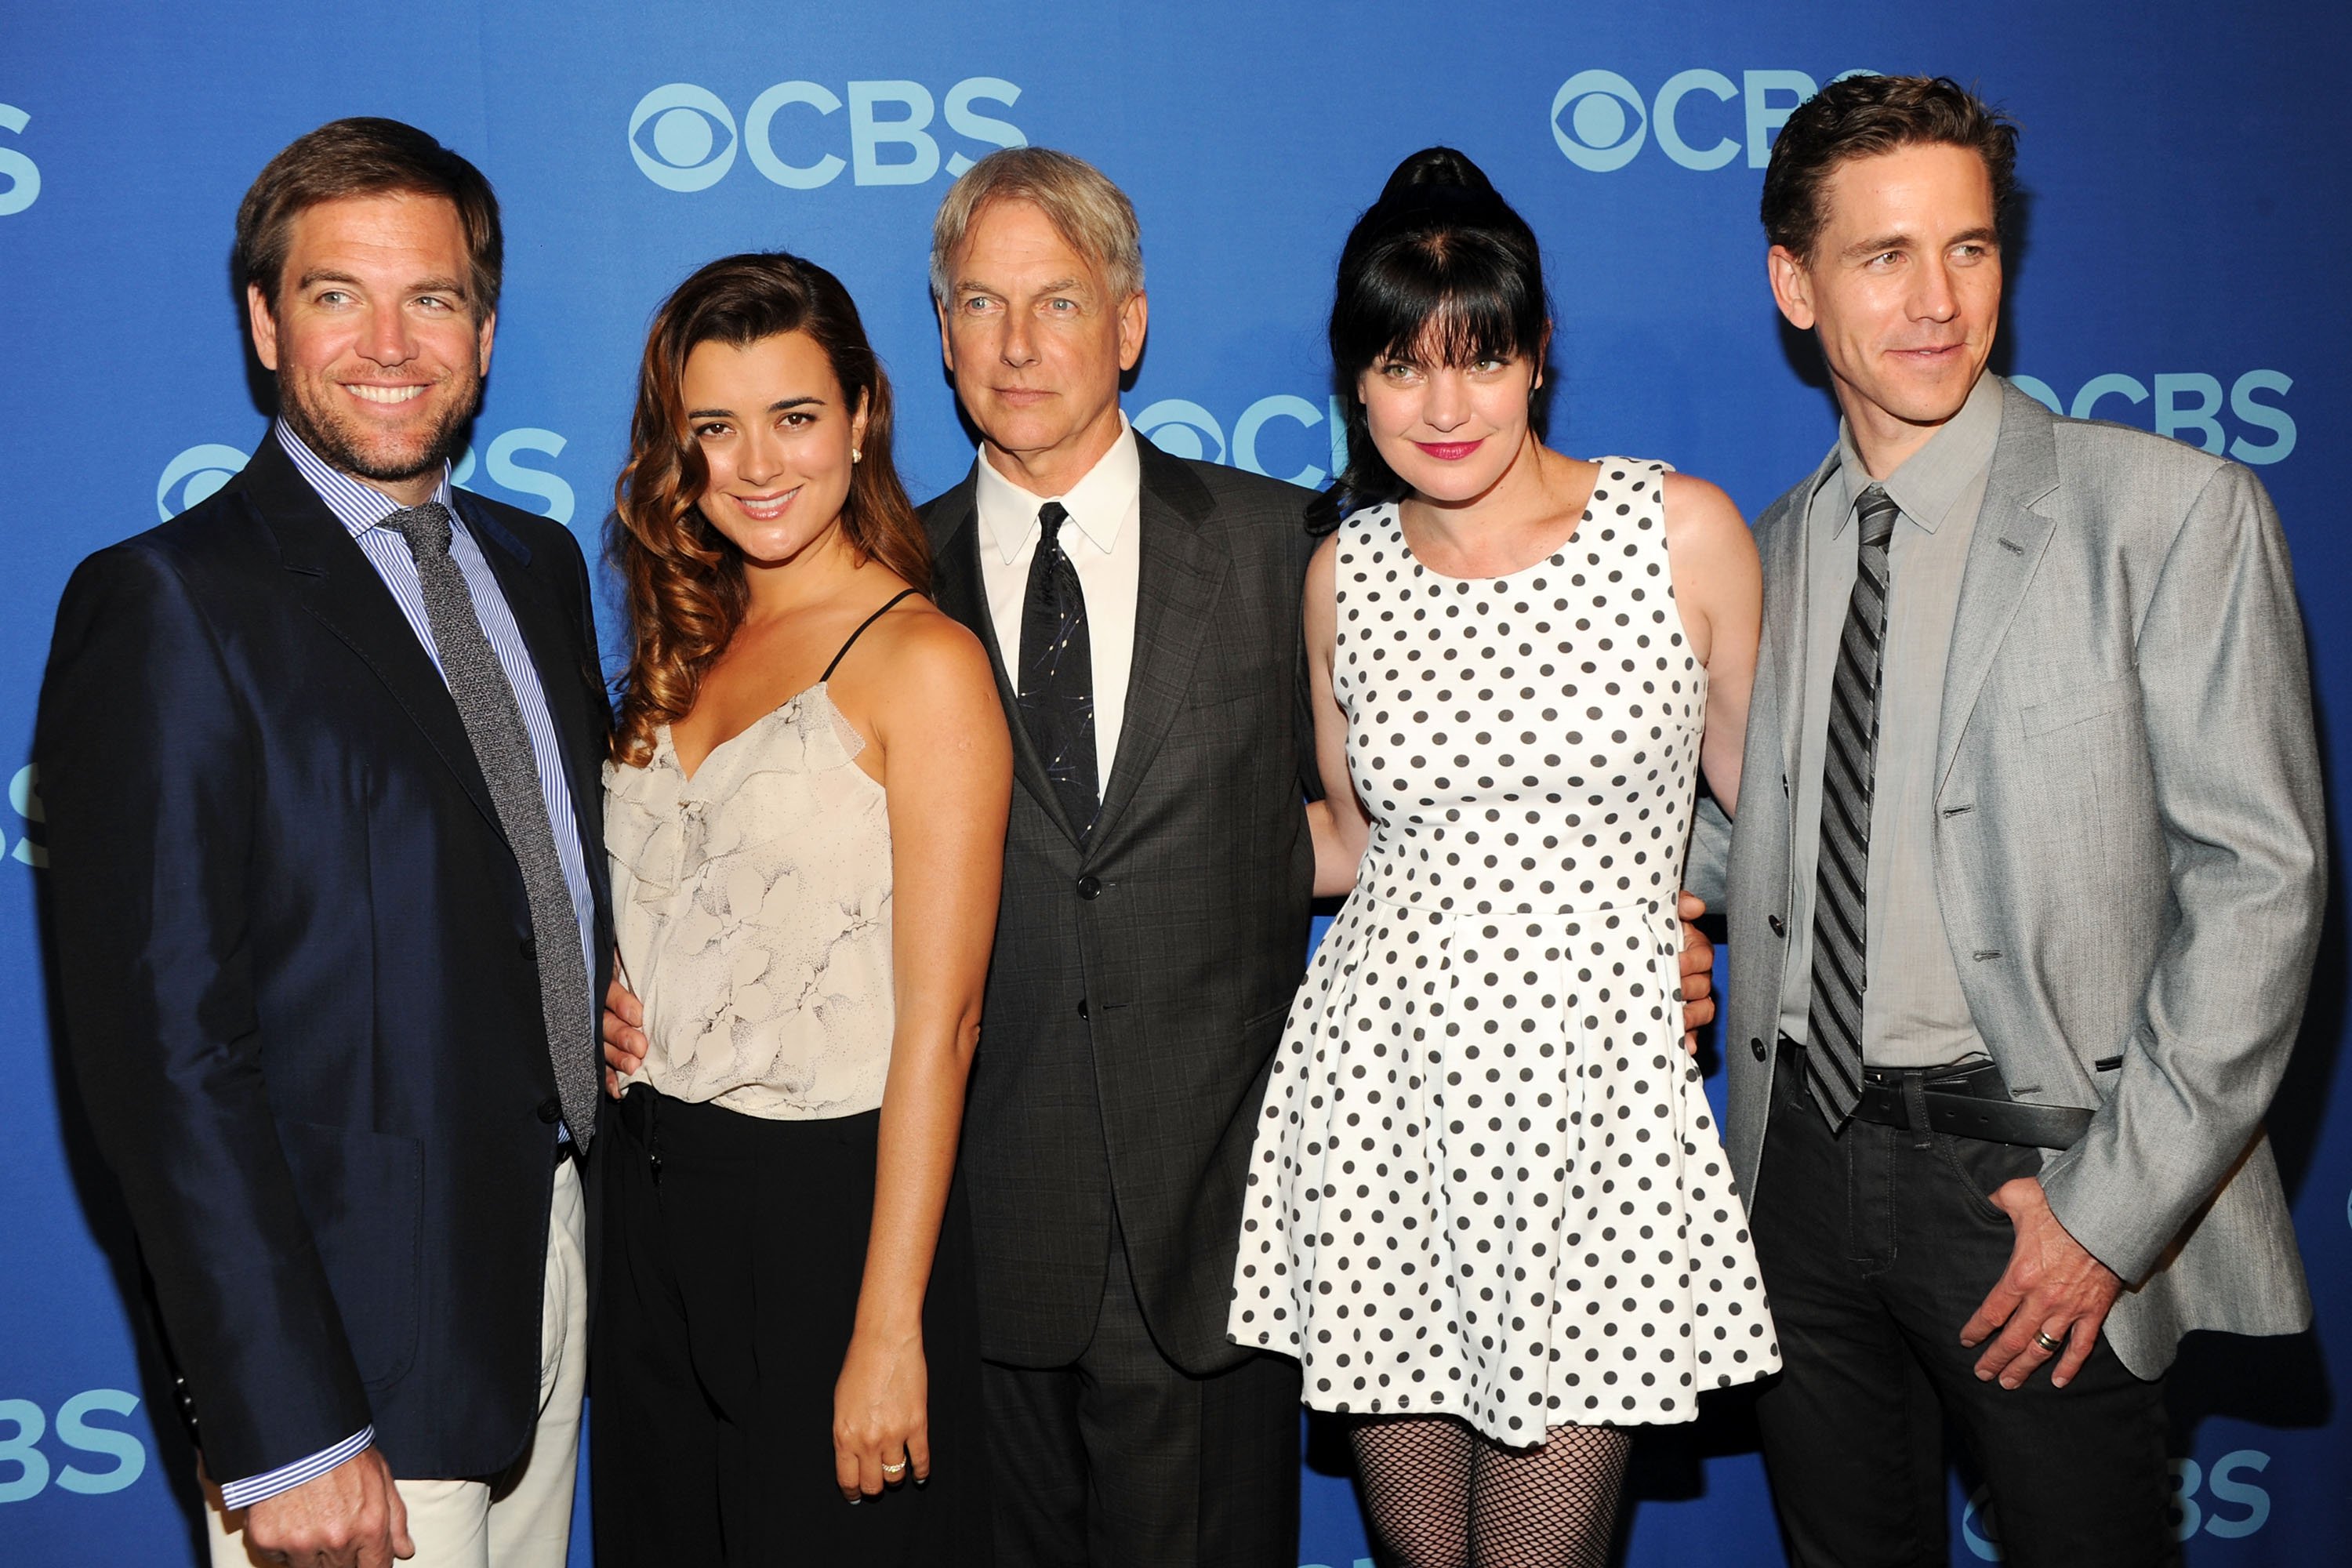 Cast of NCIS Michael Weatherly, Cote de Pable, Mark Harmon, Pauley Perrette and Brian Dietzen attend CBS 2013 Upfront Presentation at The Tent at Lincoln Center on May 15, 2013 in New York City. | Source: Getty Images